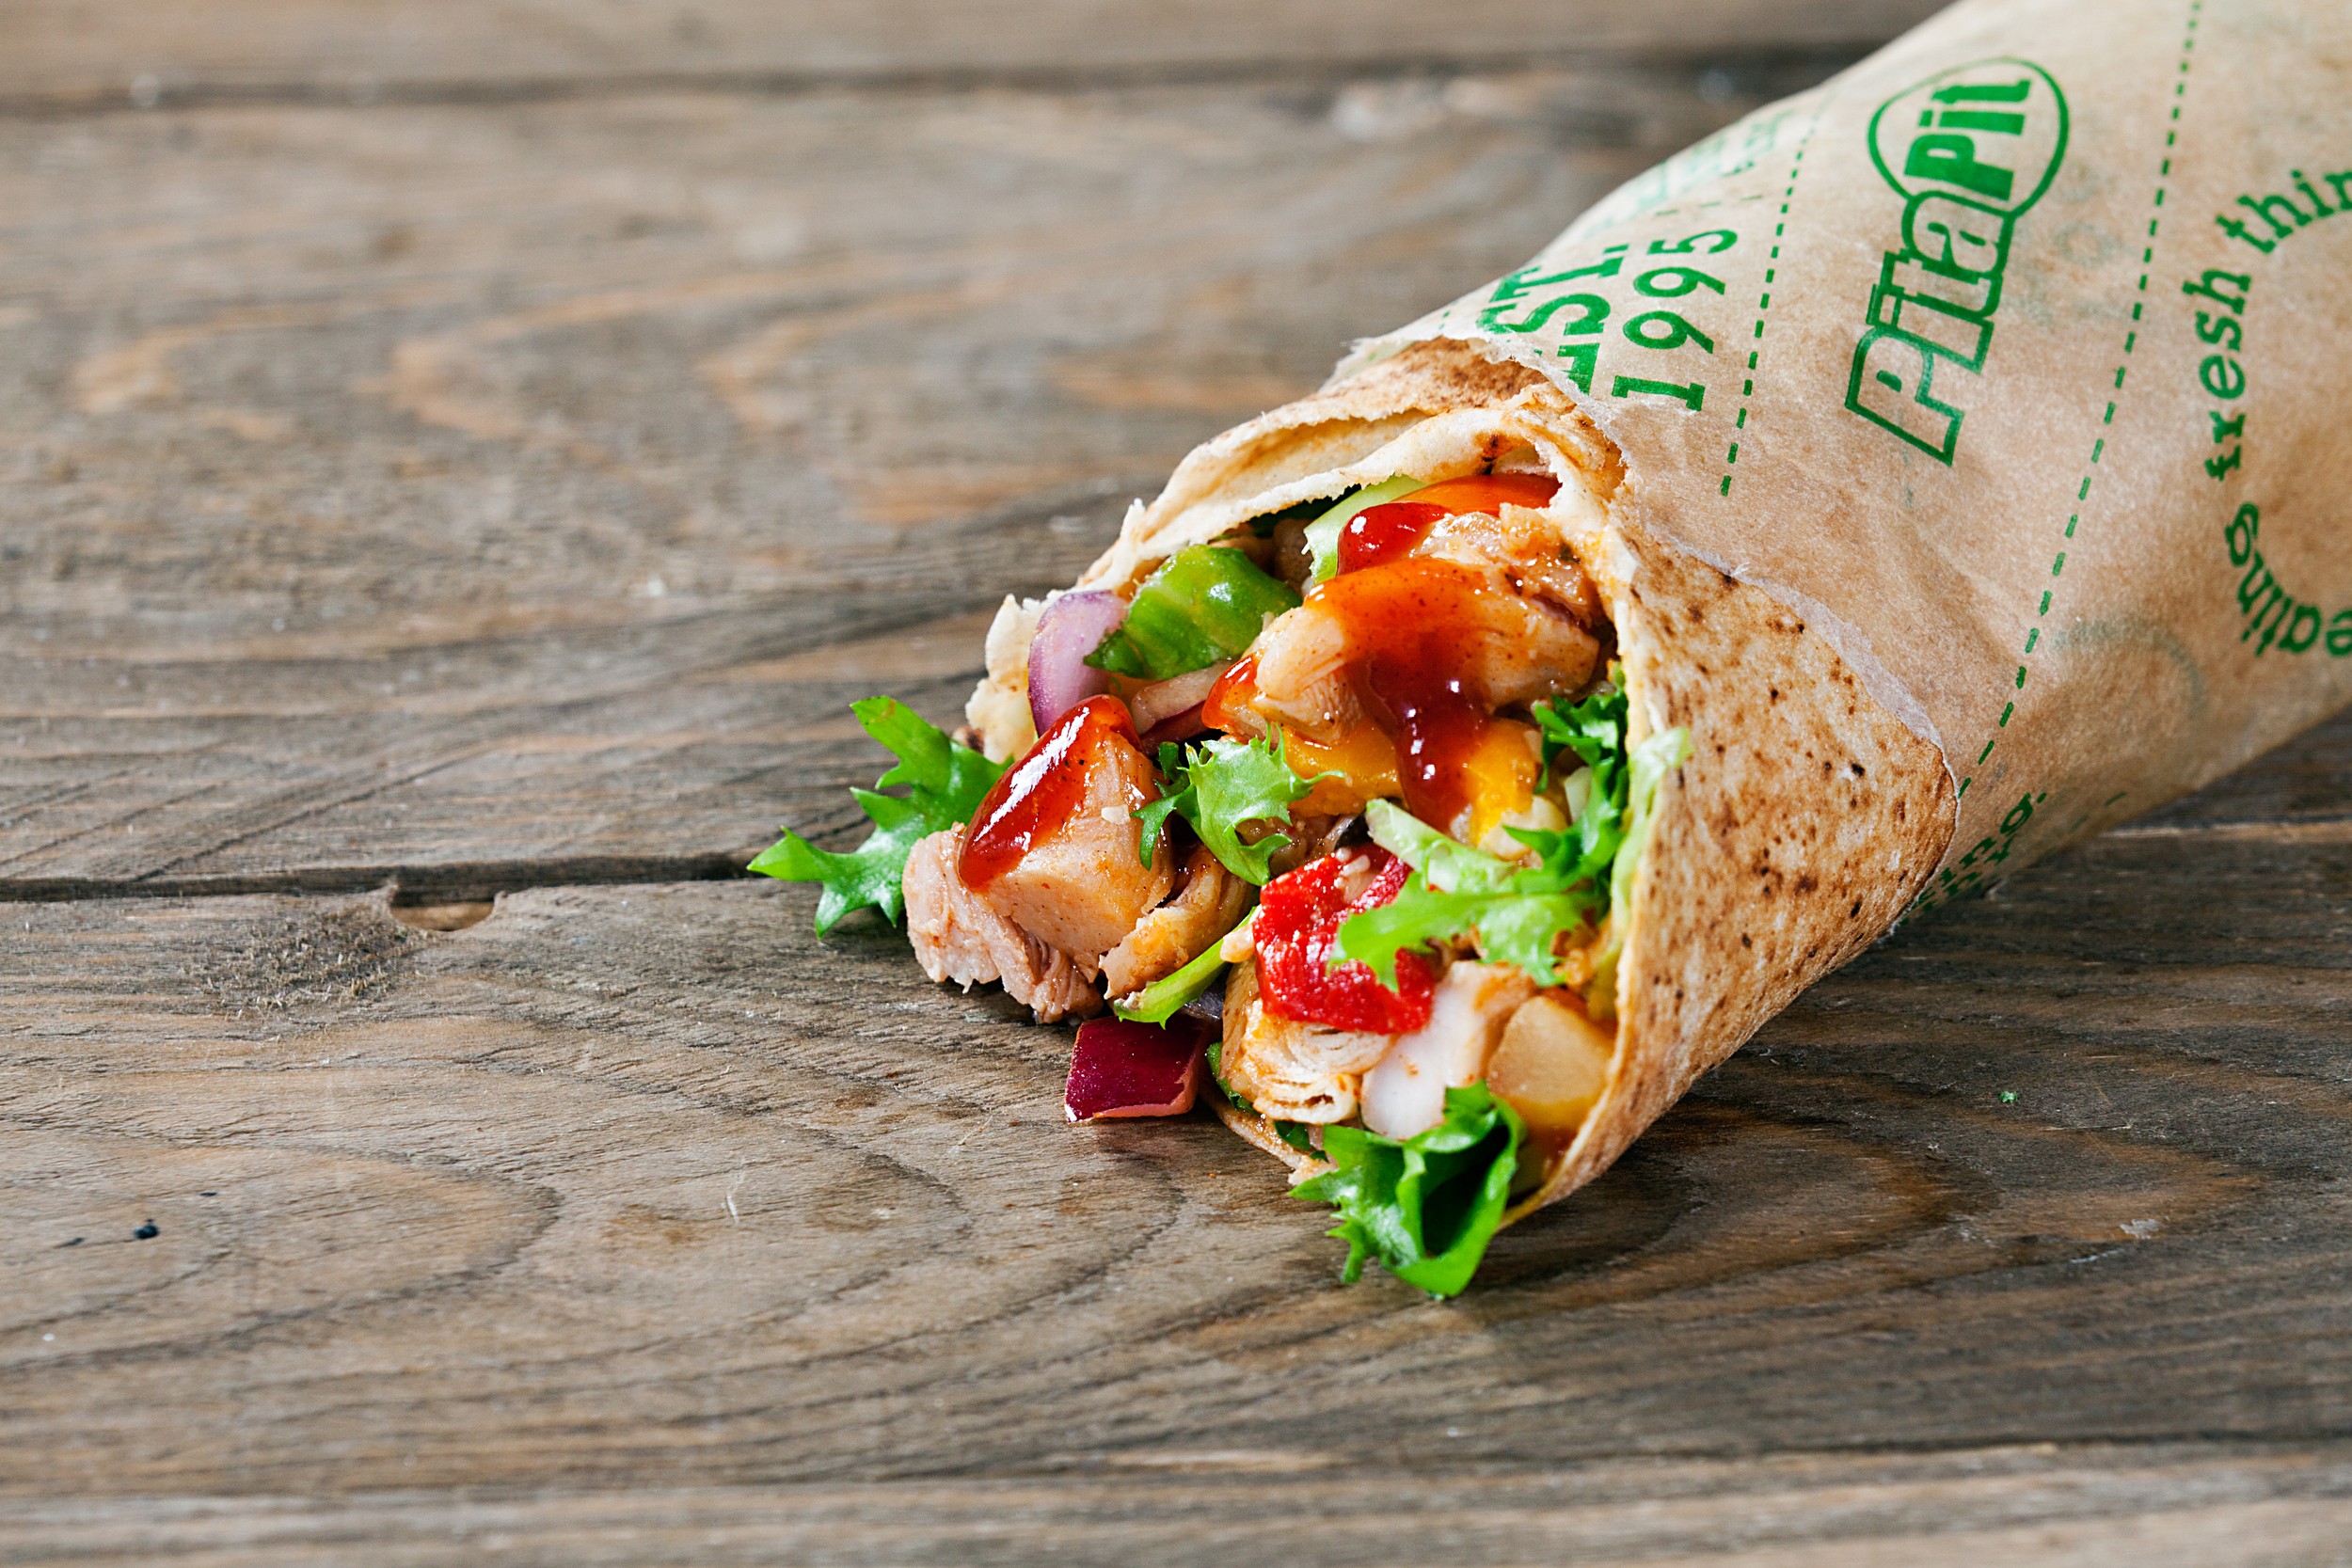 Every pita sandwich at Pita Pit is $4 for today only | Blogs